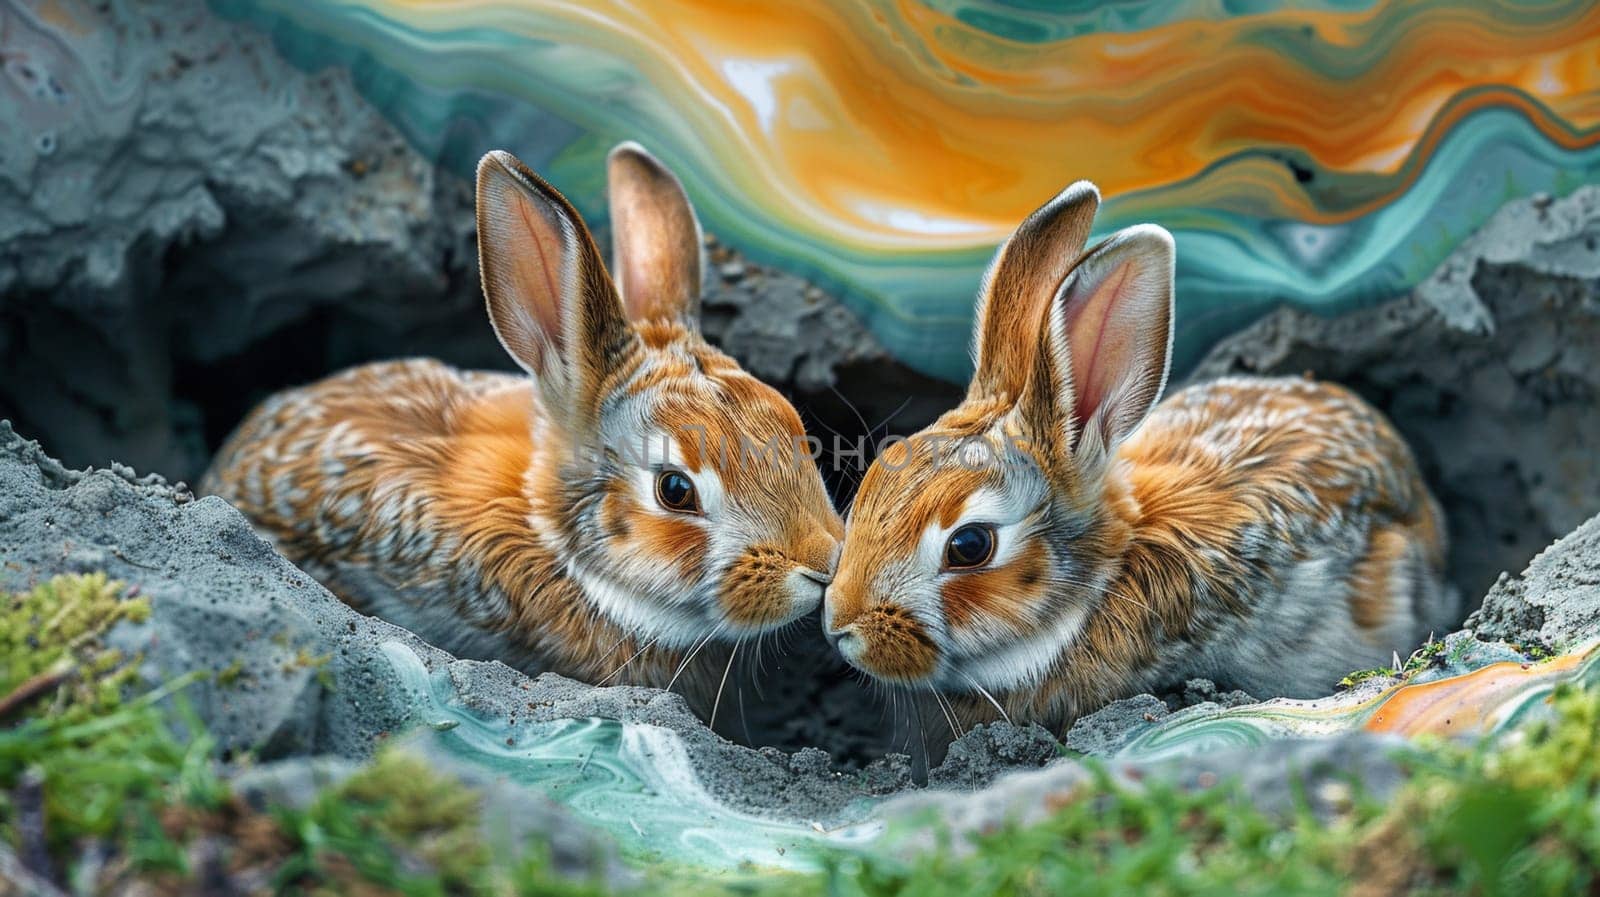 Two rabbits are sitting in a hole with colorful background